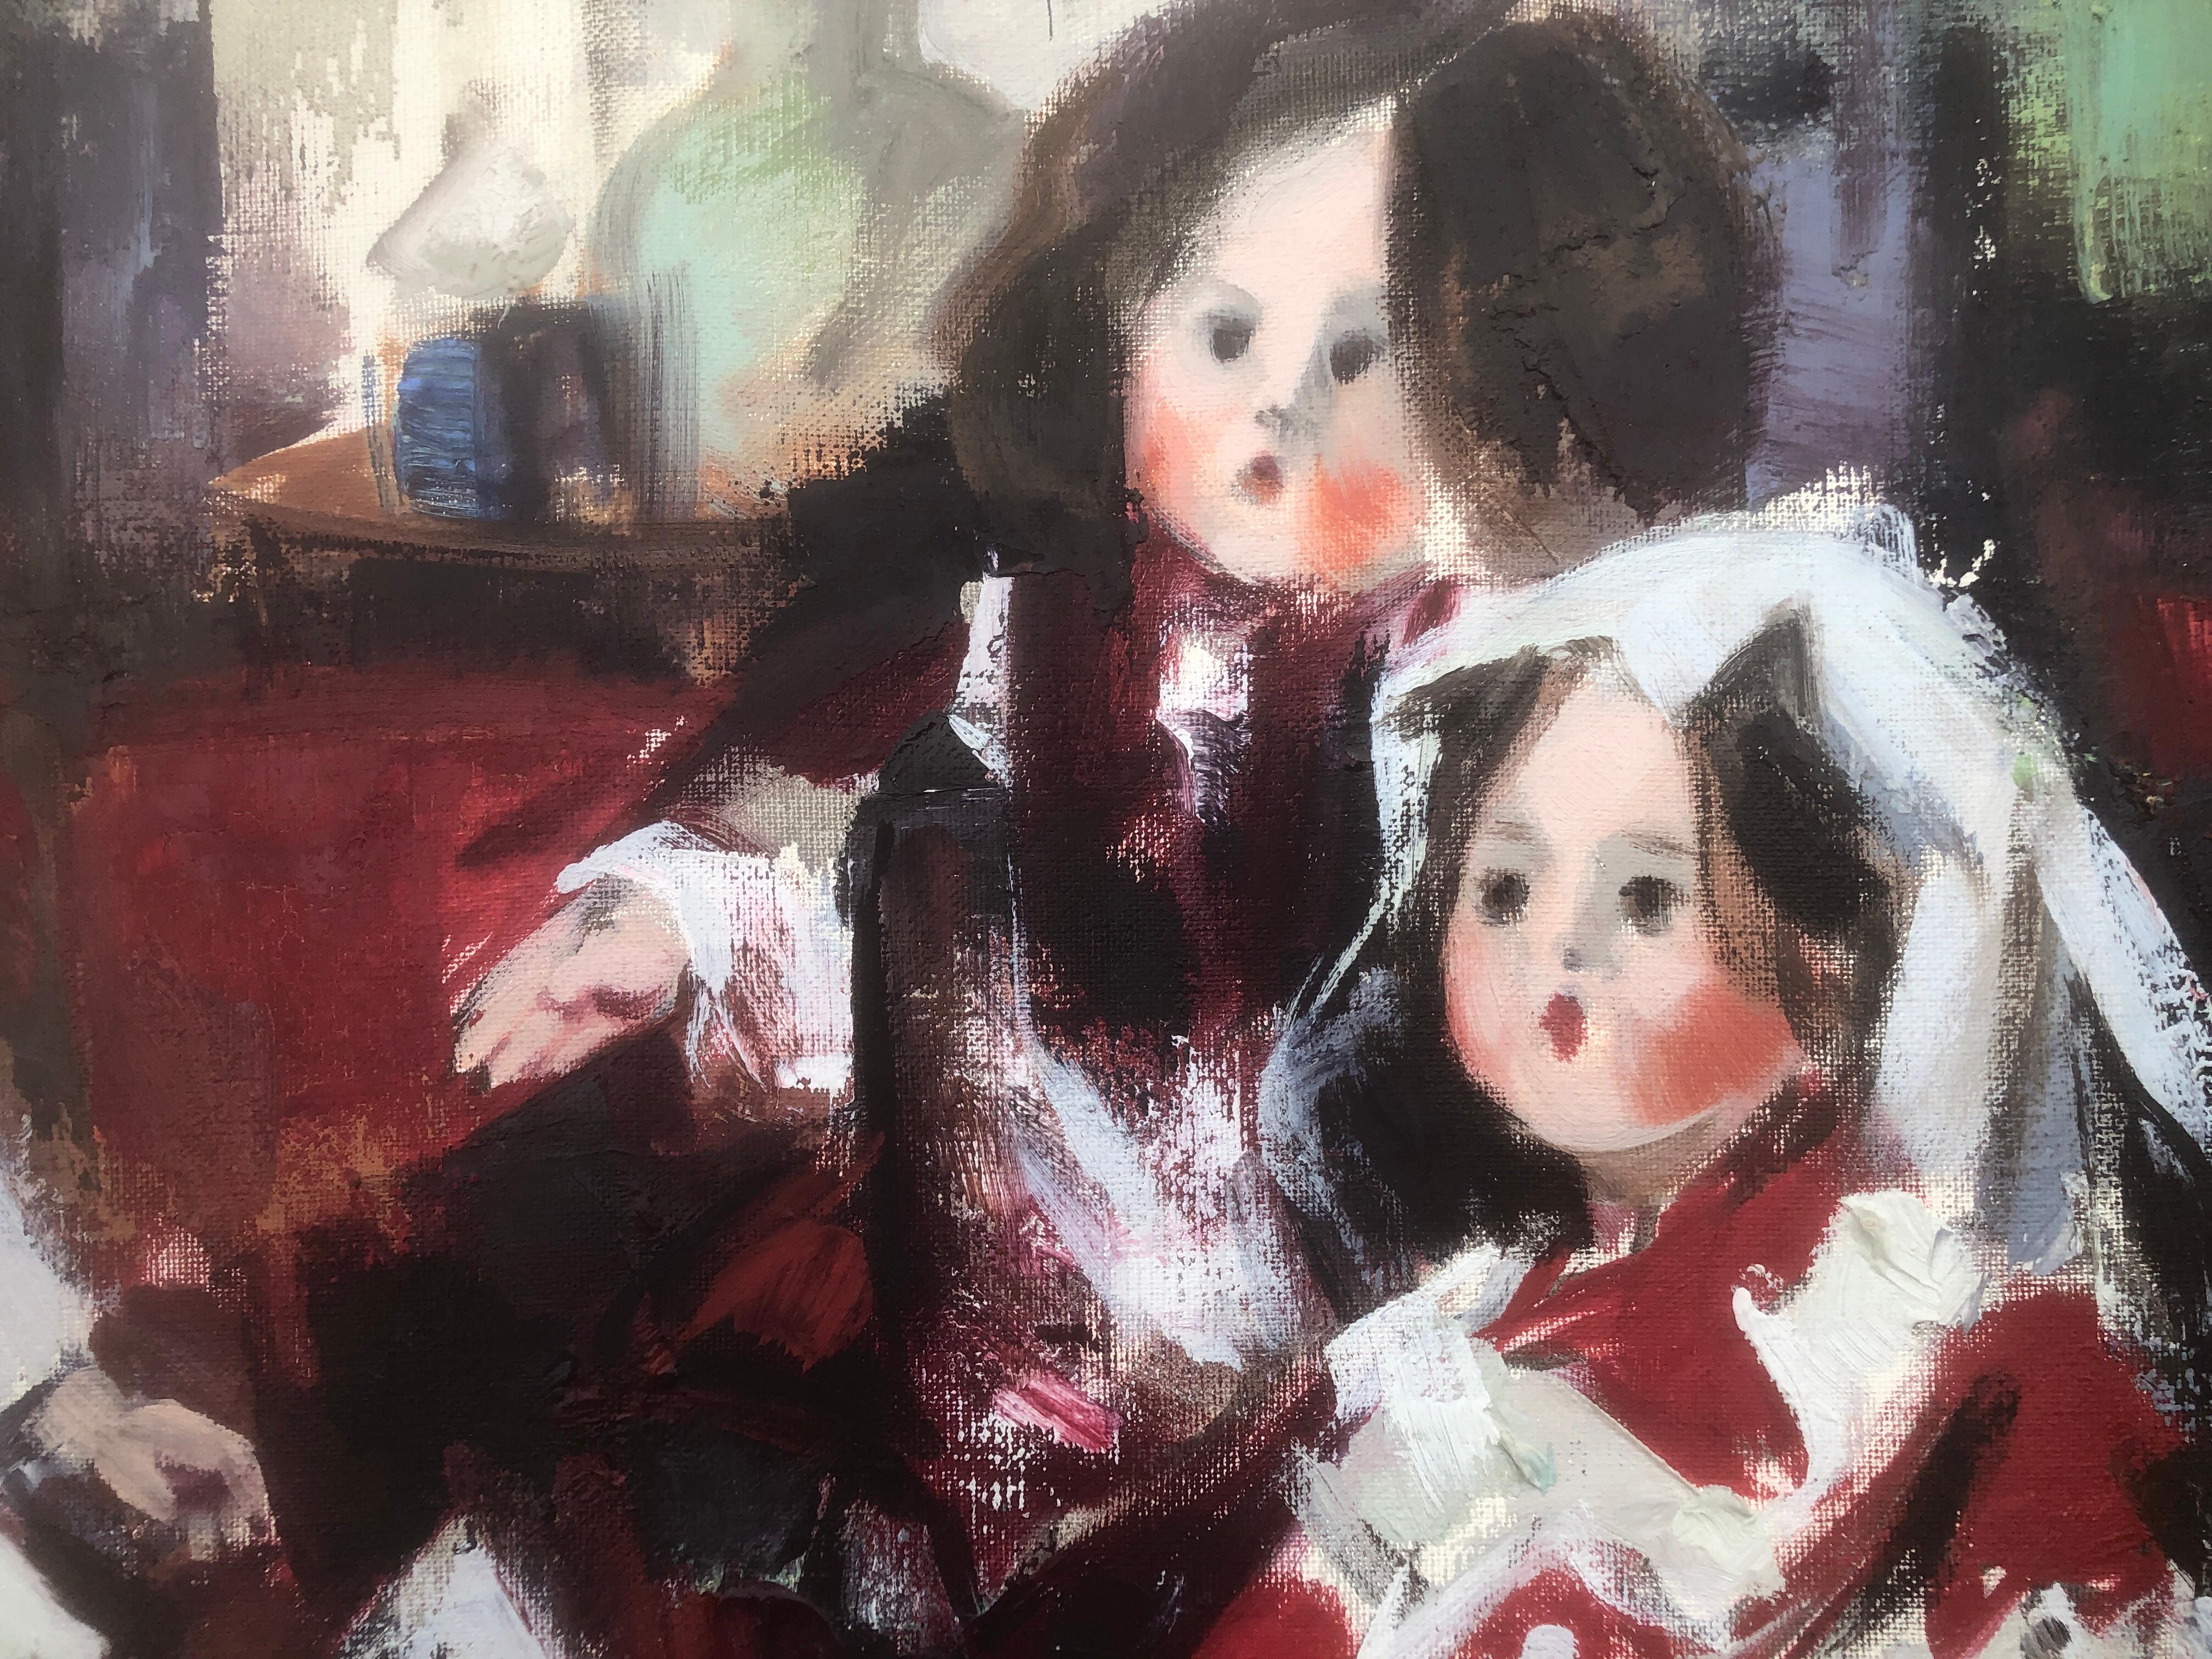 Antoni Vives Fierro (1940) - Dolls - Oil on canvas
Oil measures 54x65 cm.
Frame dimension 69x80 cm..

He was born in Barcelona in 1940. He is a versatile painter specialized in urban landscape and who uses different techniques, of which collage is